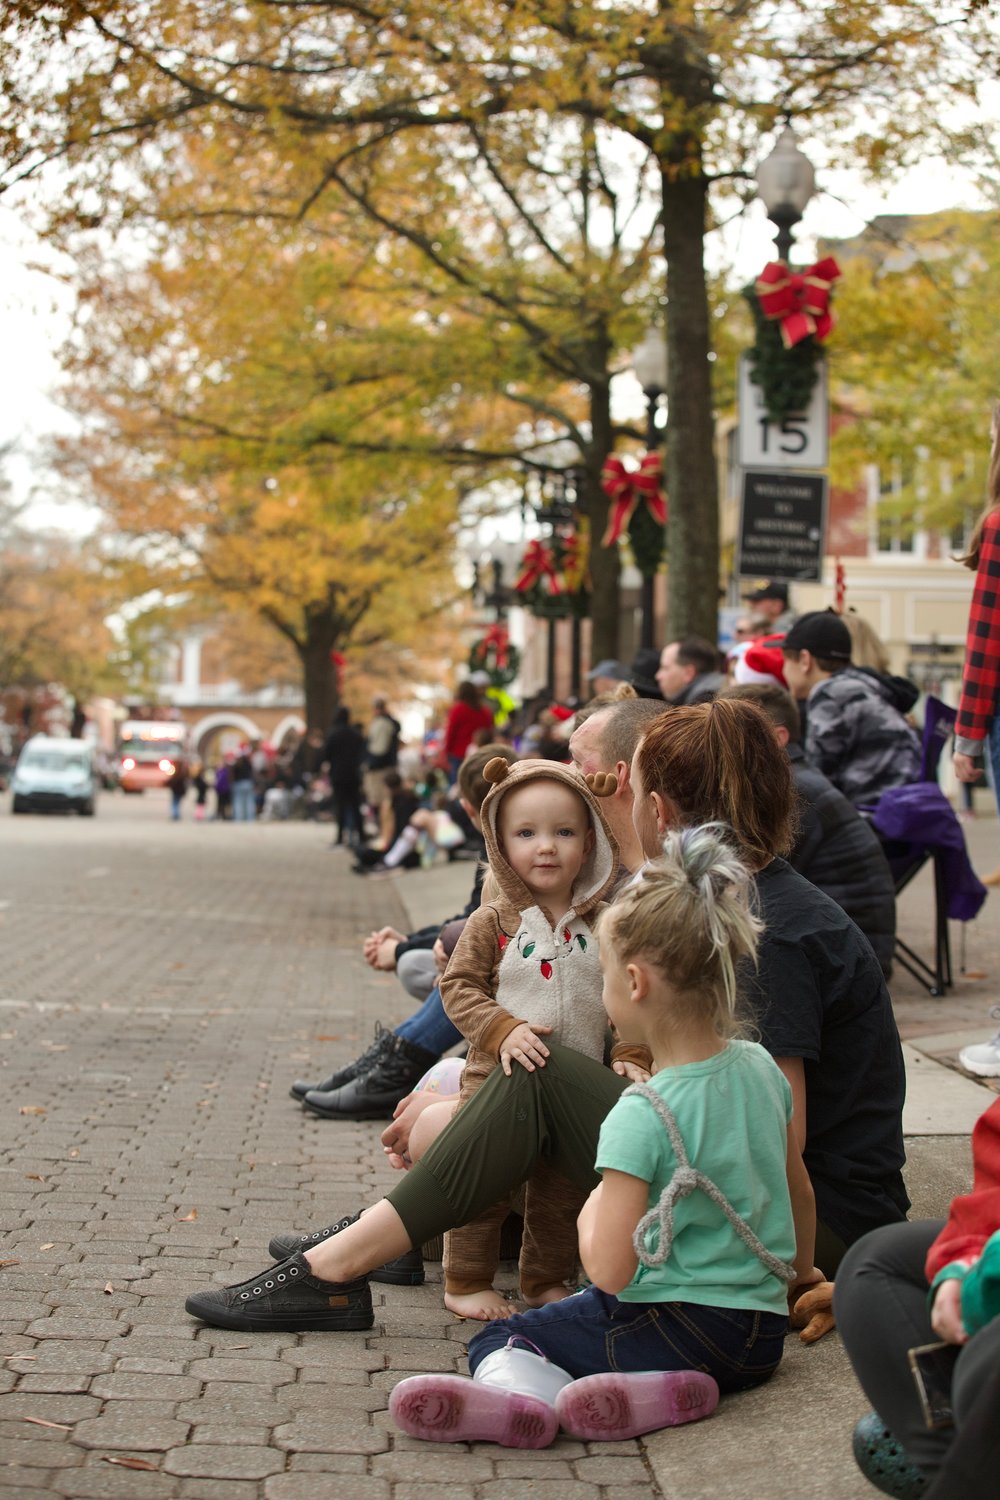 People watch as the Fayetteville Rotary Christmas Parade makes its way through downtown Fayetteville on Saturday.